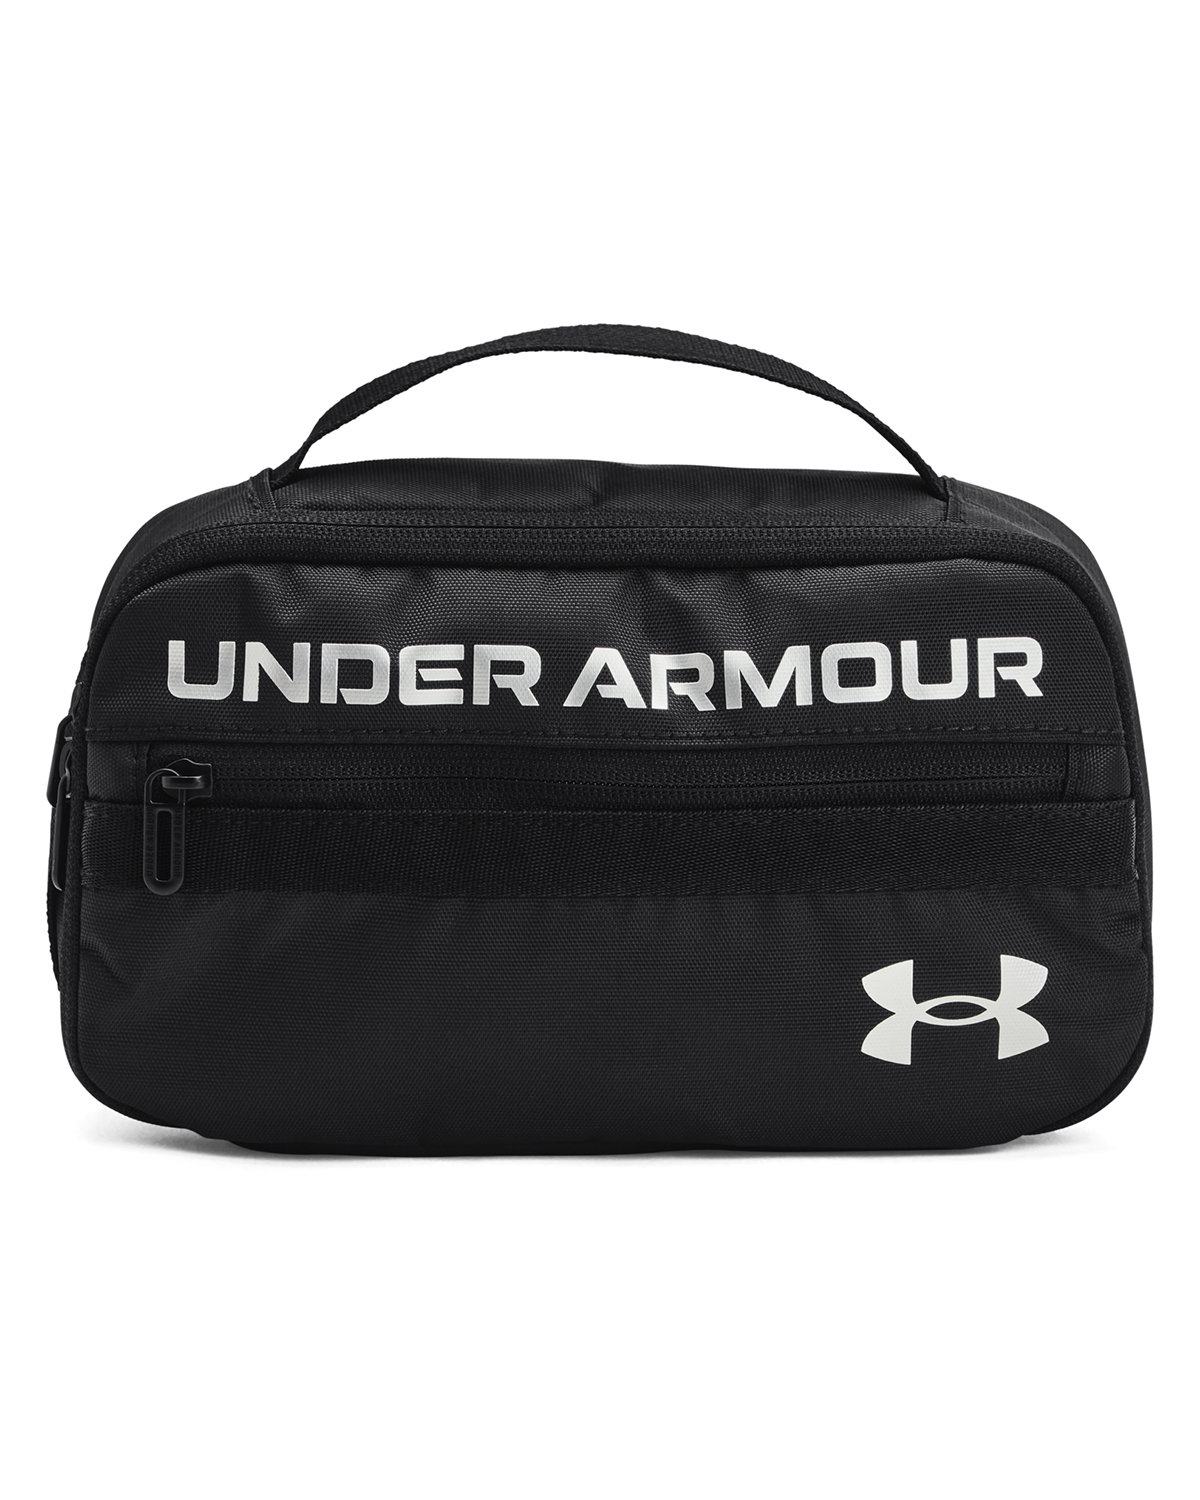 Under Armour 1361993 - Contain Travel Kit